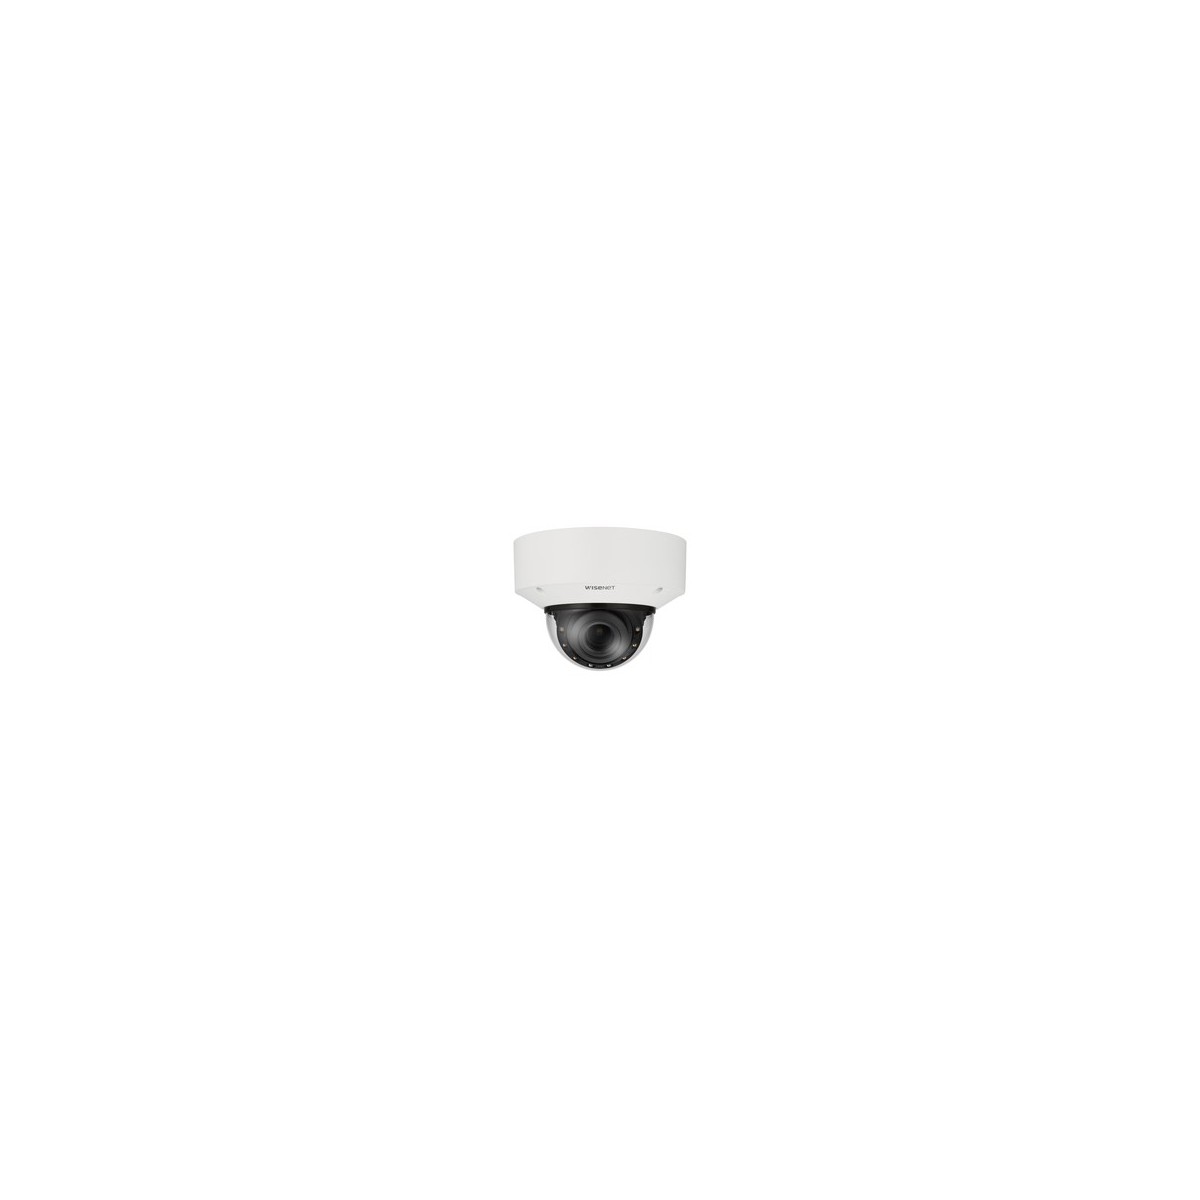 Hanwha Techwin Hanwha XNV-C9083R - IP security camera - Indoor  outdoor - Wired - 120 dB - Ceiling - White